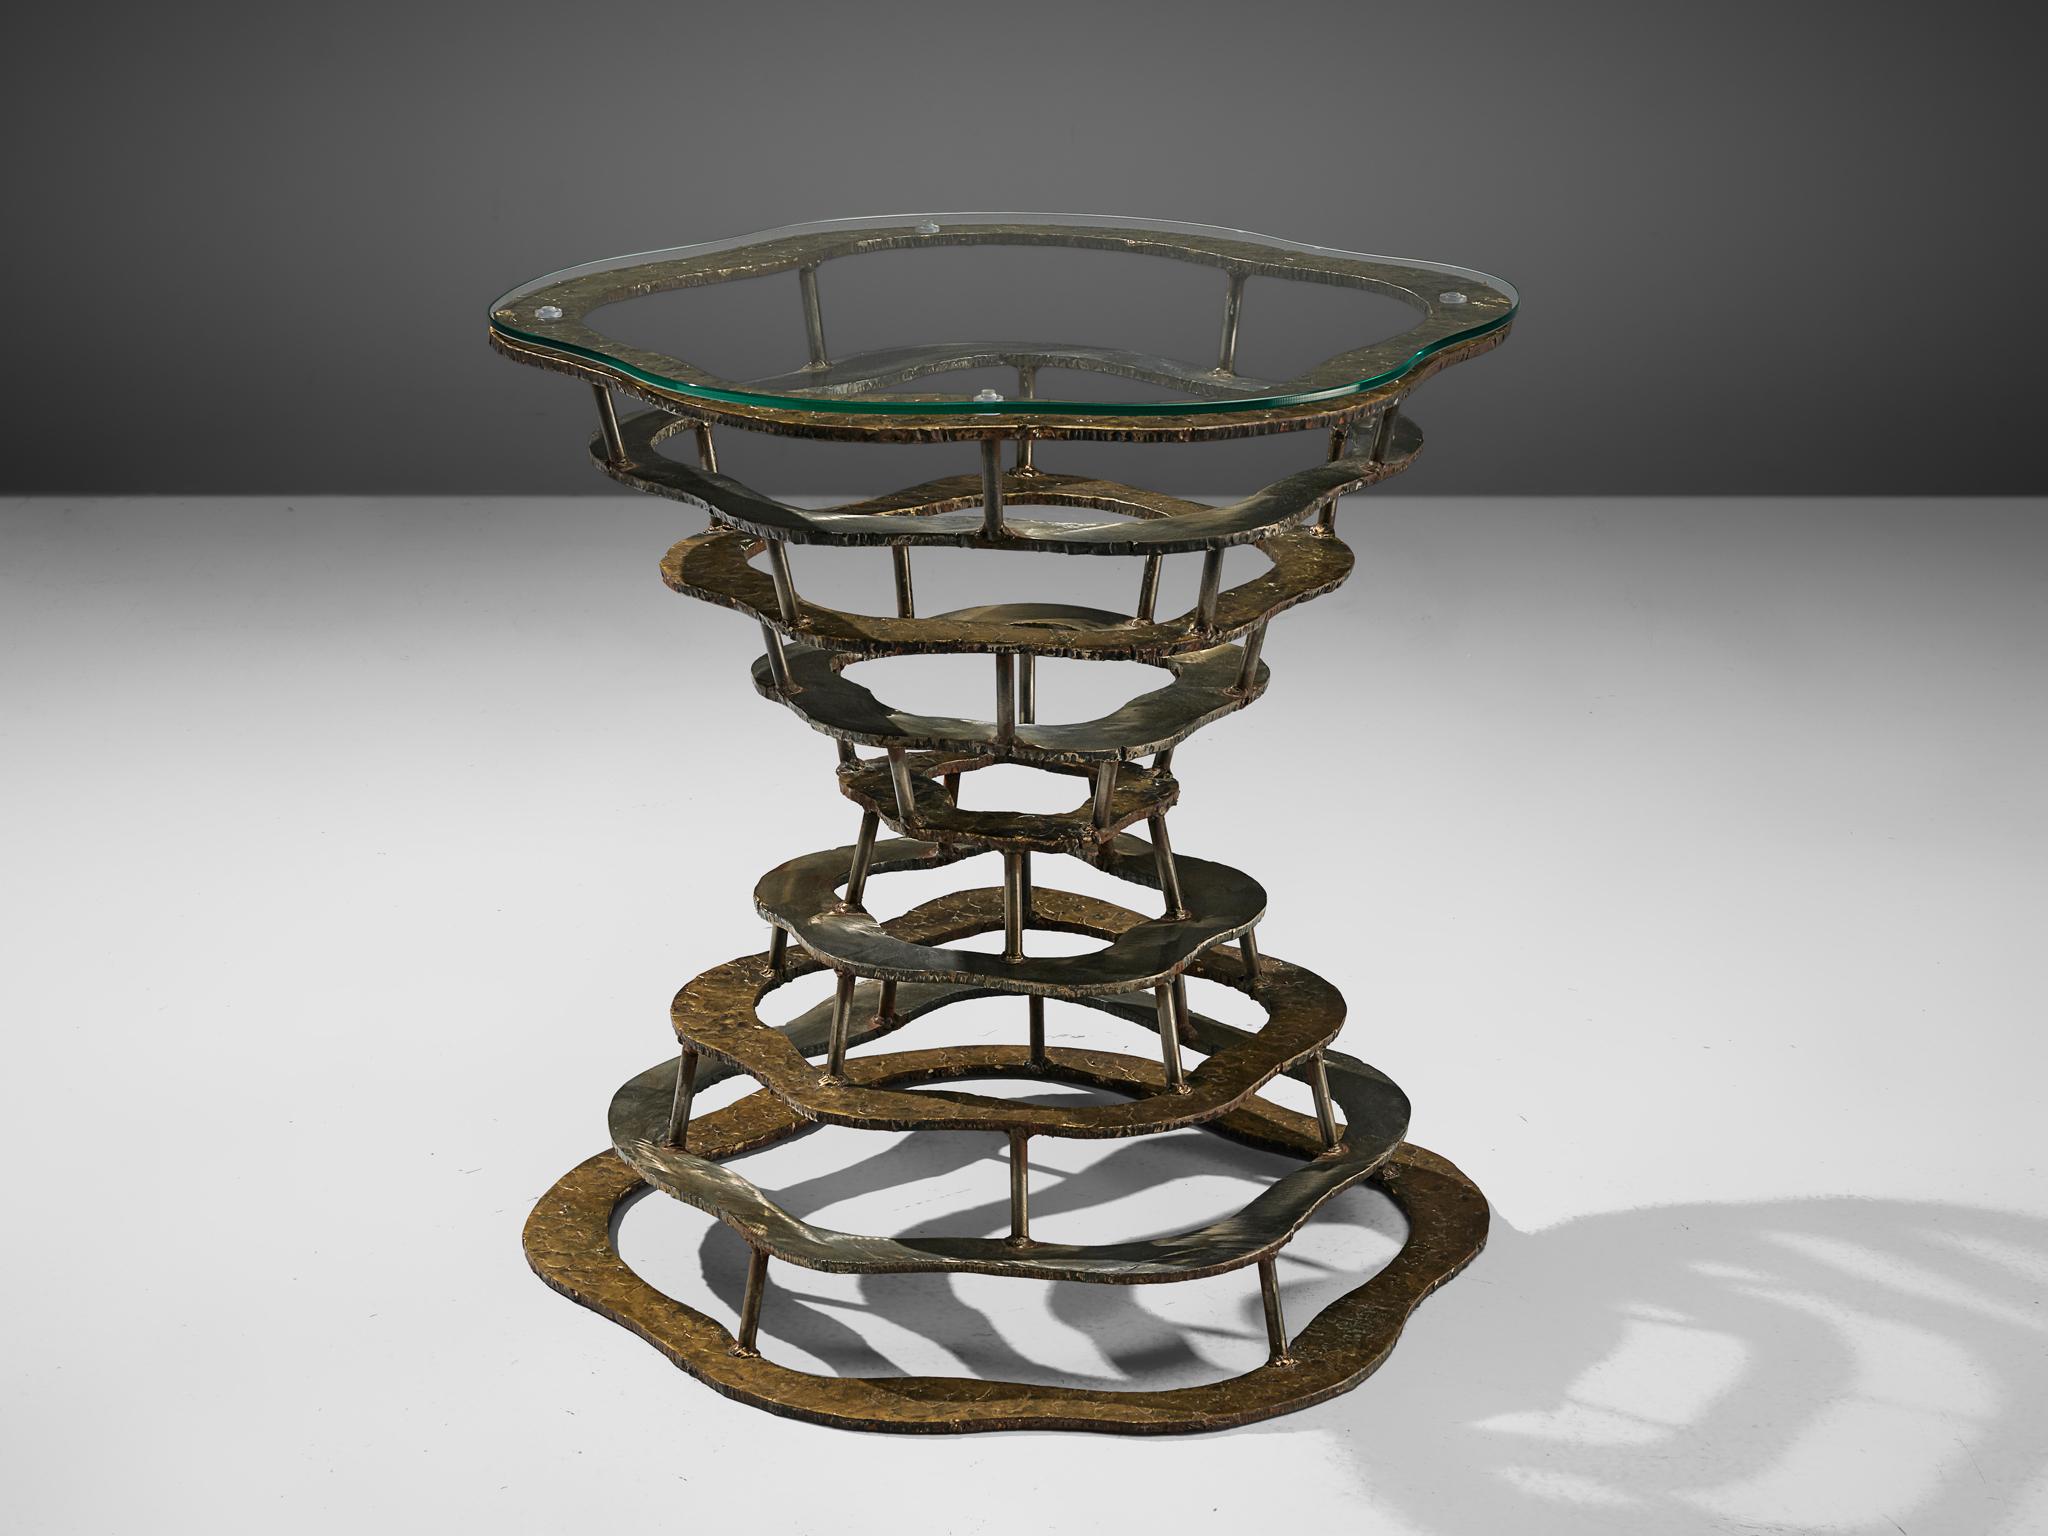 Silas Seandel, pair of 'Volcano' side table, glass, brass, steel, United States, 1970s

Brutalist 'Volcano' table by Silas Seandel. The centre table is bluid up by nine amorphic rings of alternating textured brass and matte finished stainless